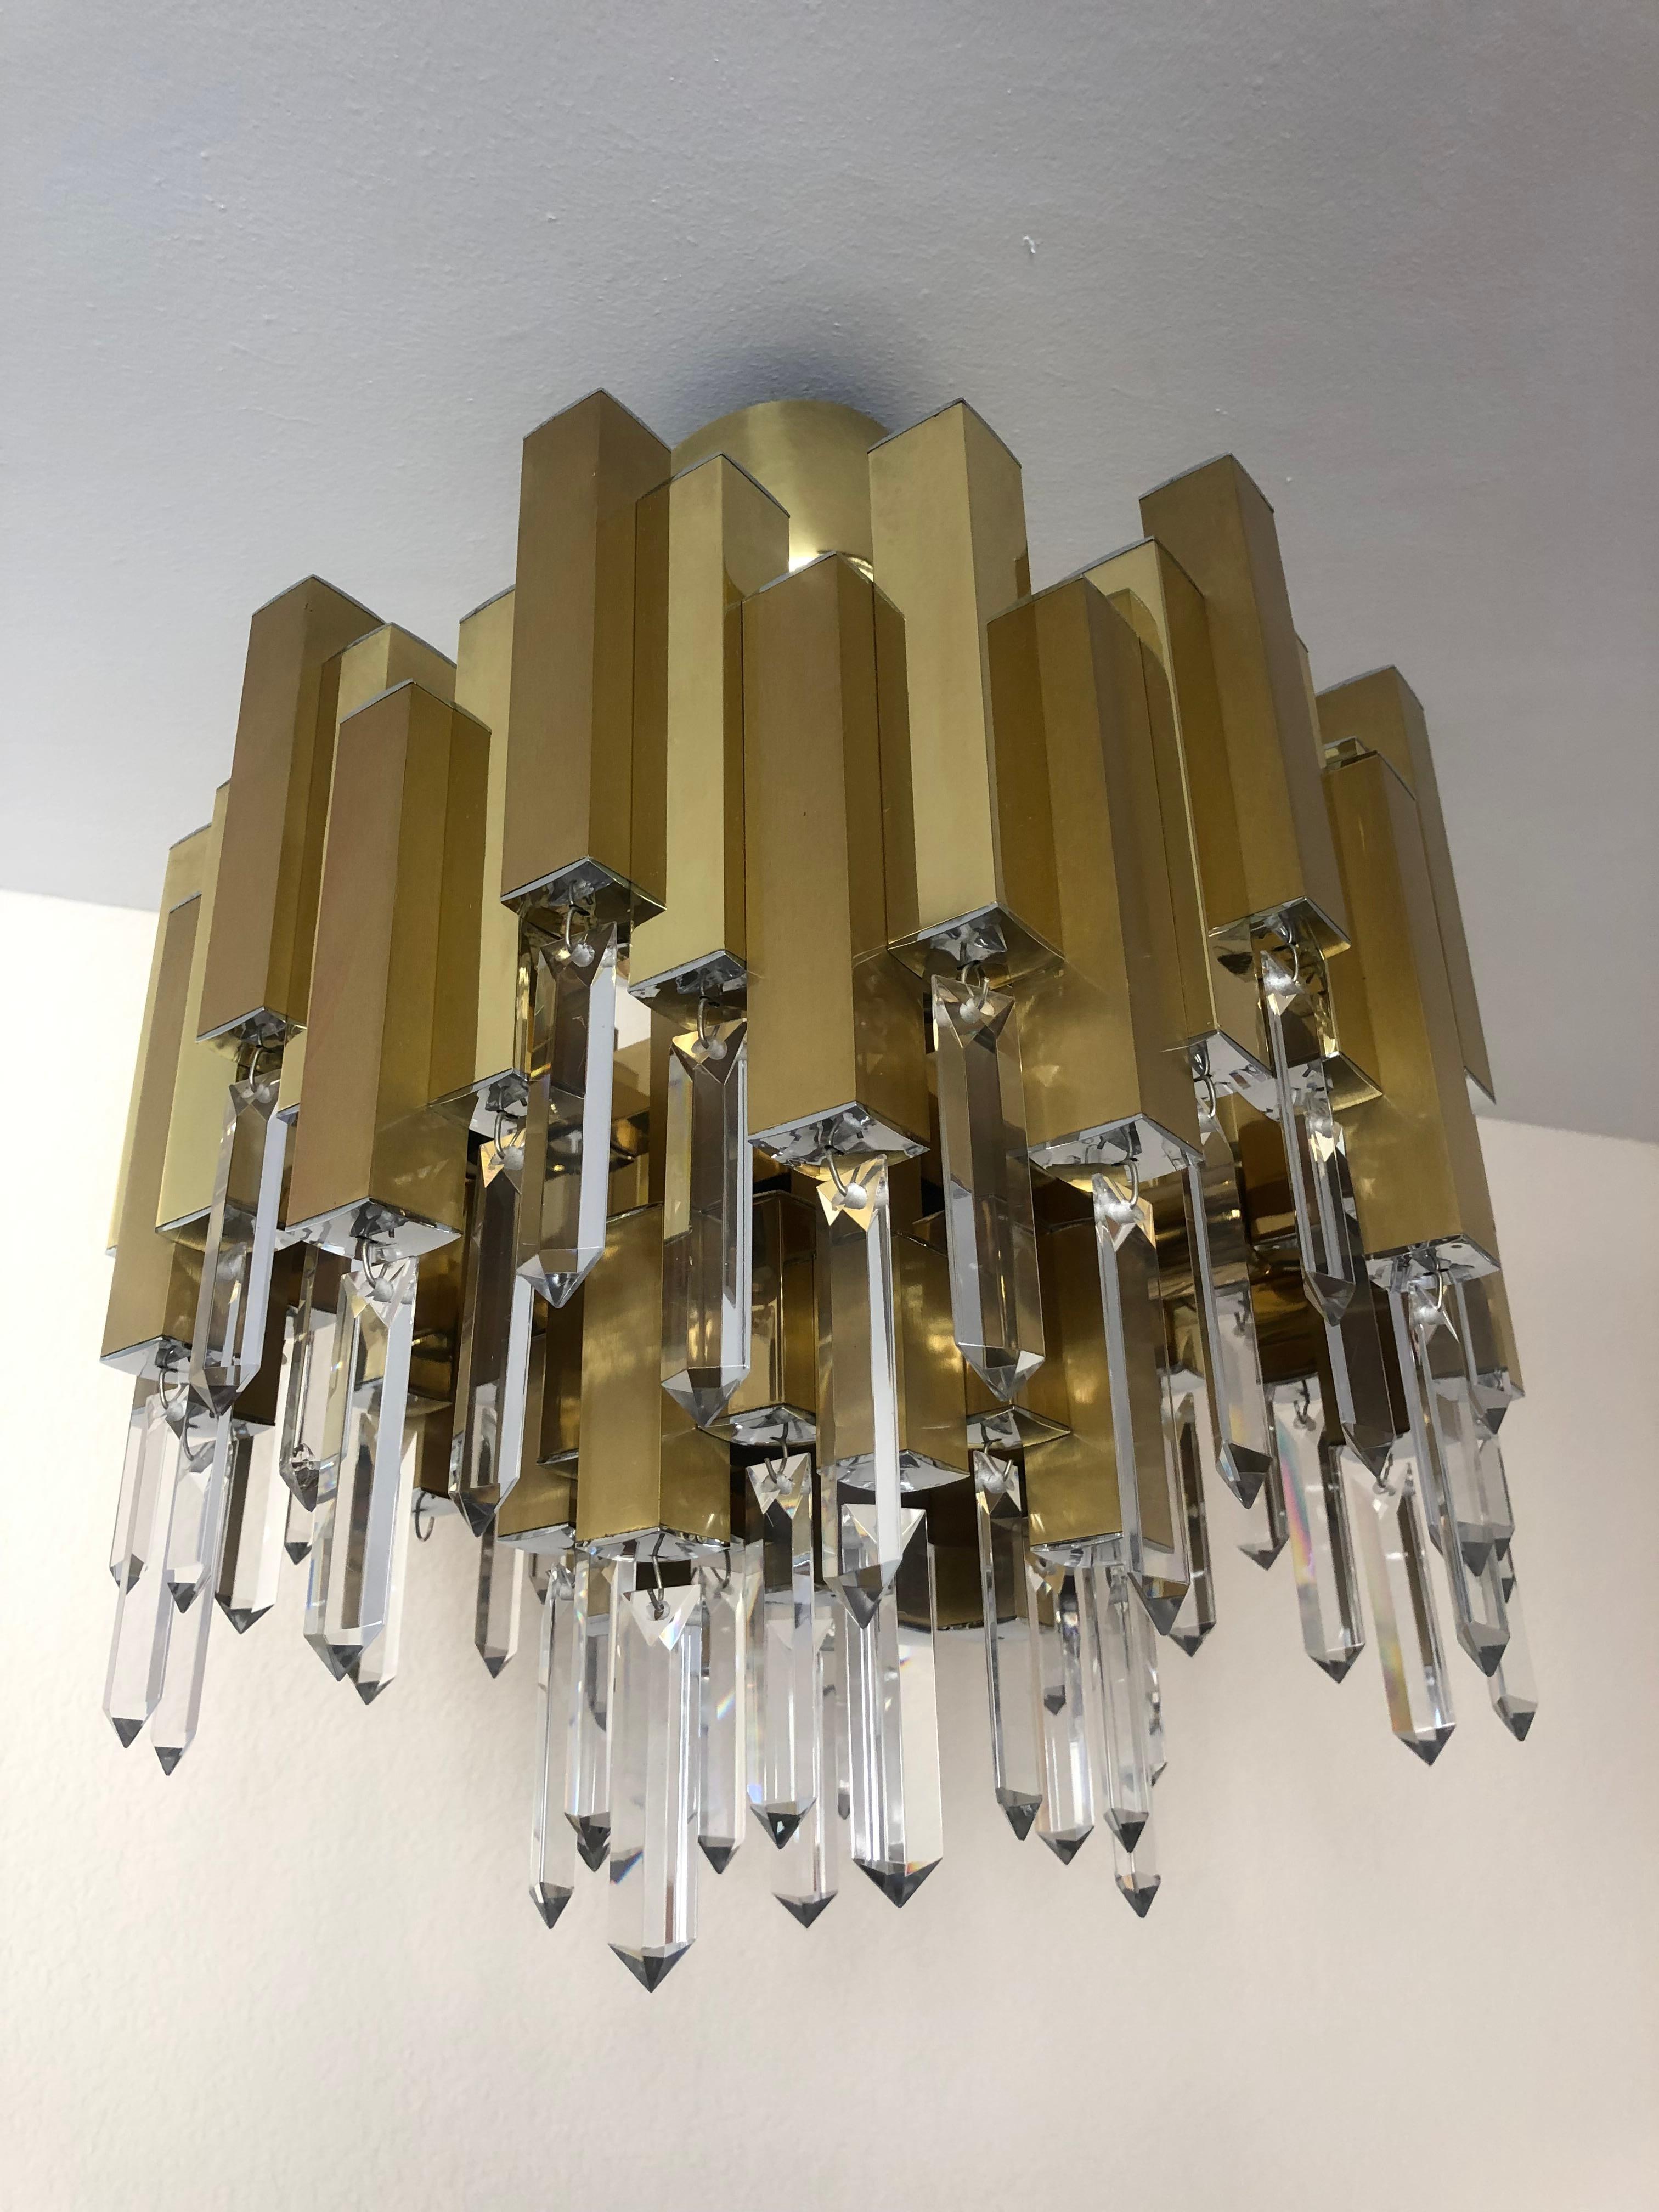 Spanish Midcentury Golden Brass Prism Crystals Chandelier by Lumica, Barcelona, 1970s For Sale